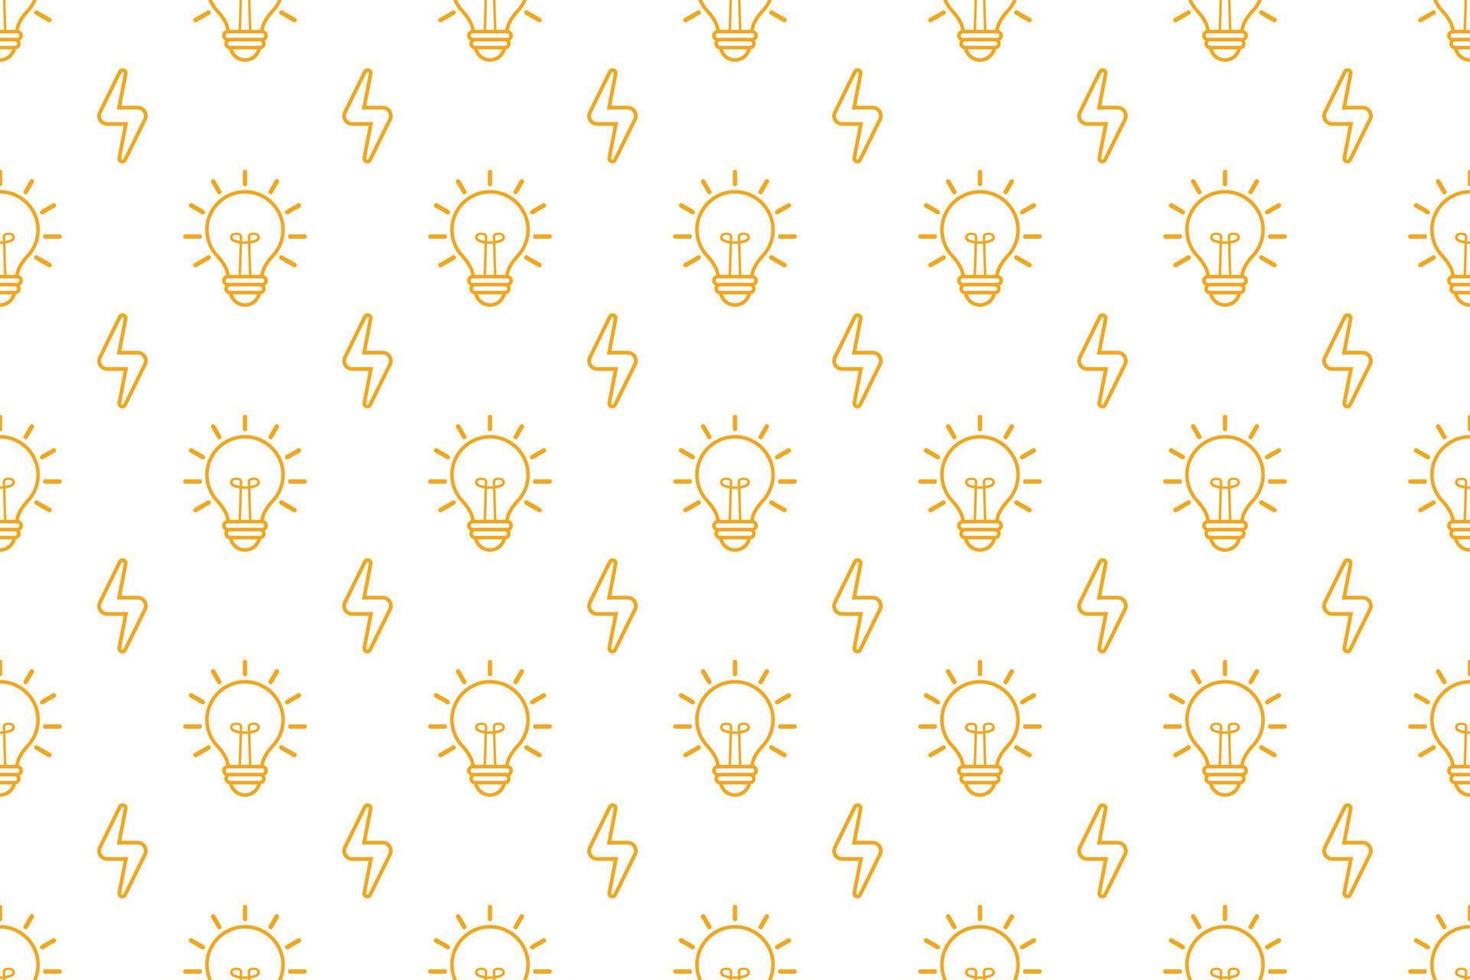 Light bulb electricity seamless pattern on white background vector design